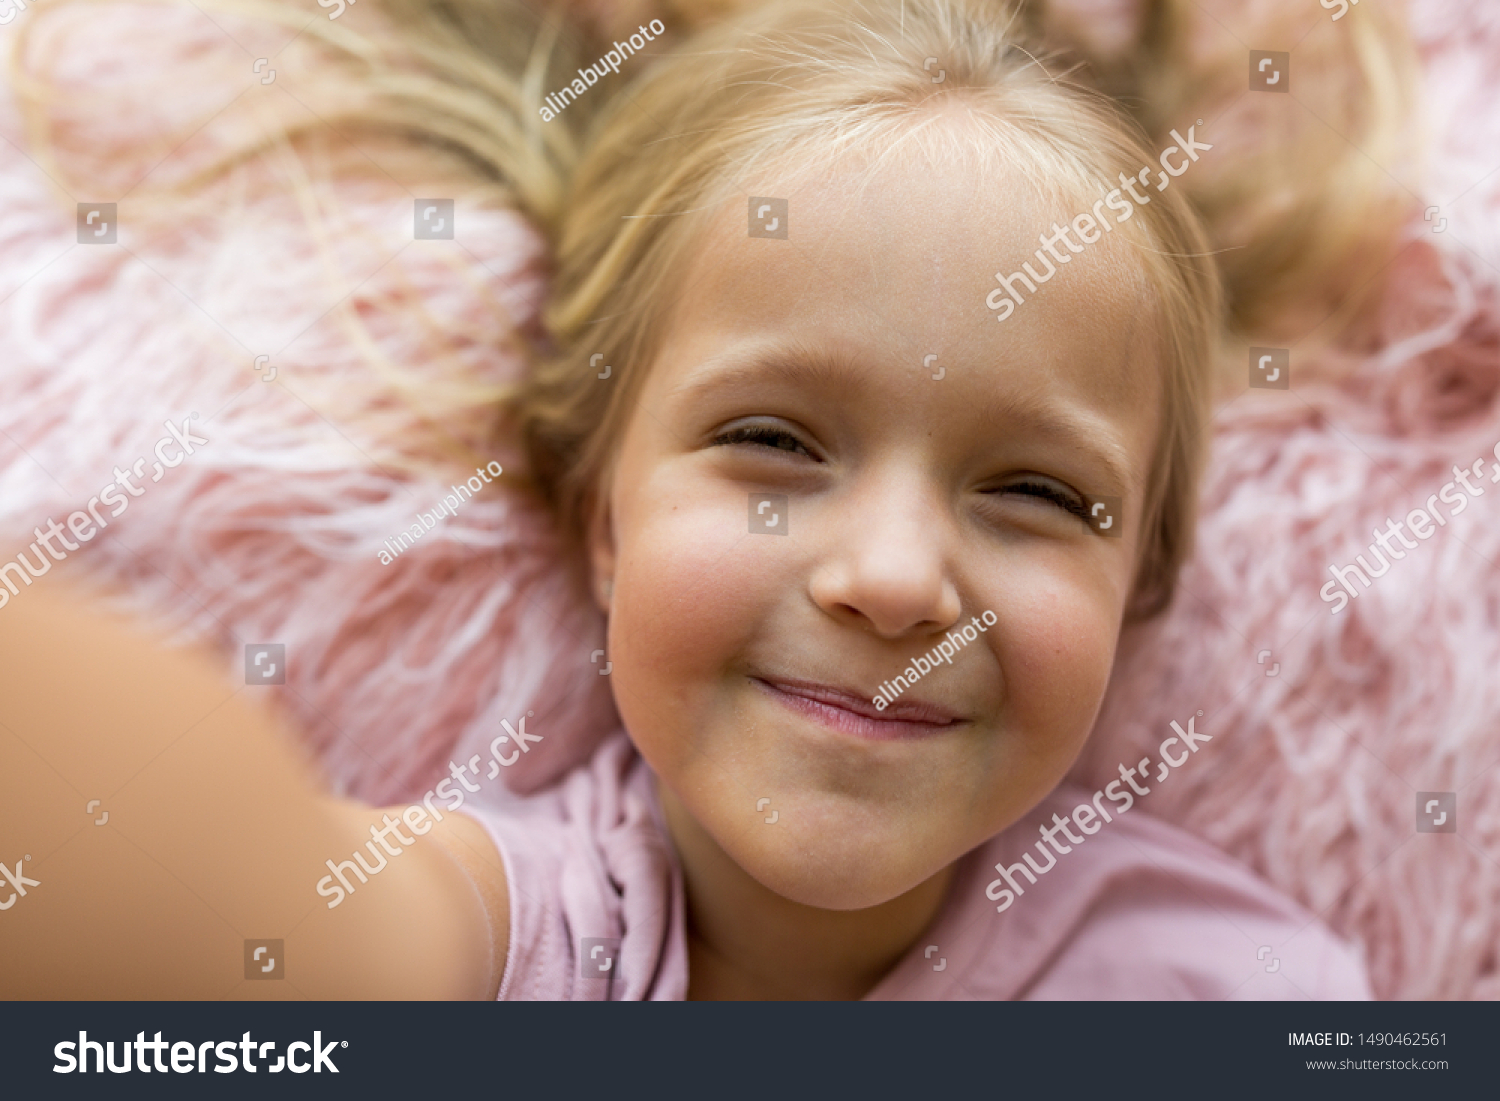 2. Adorable little girl with long blond hair smiling - wide 1